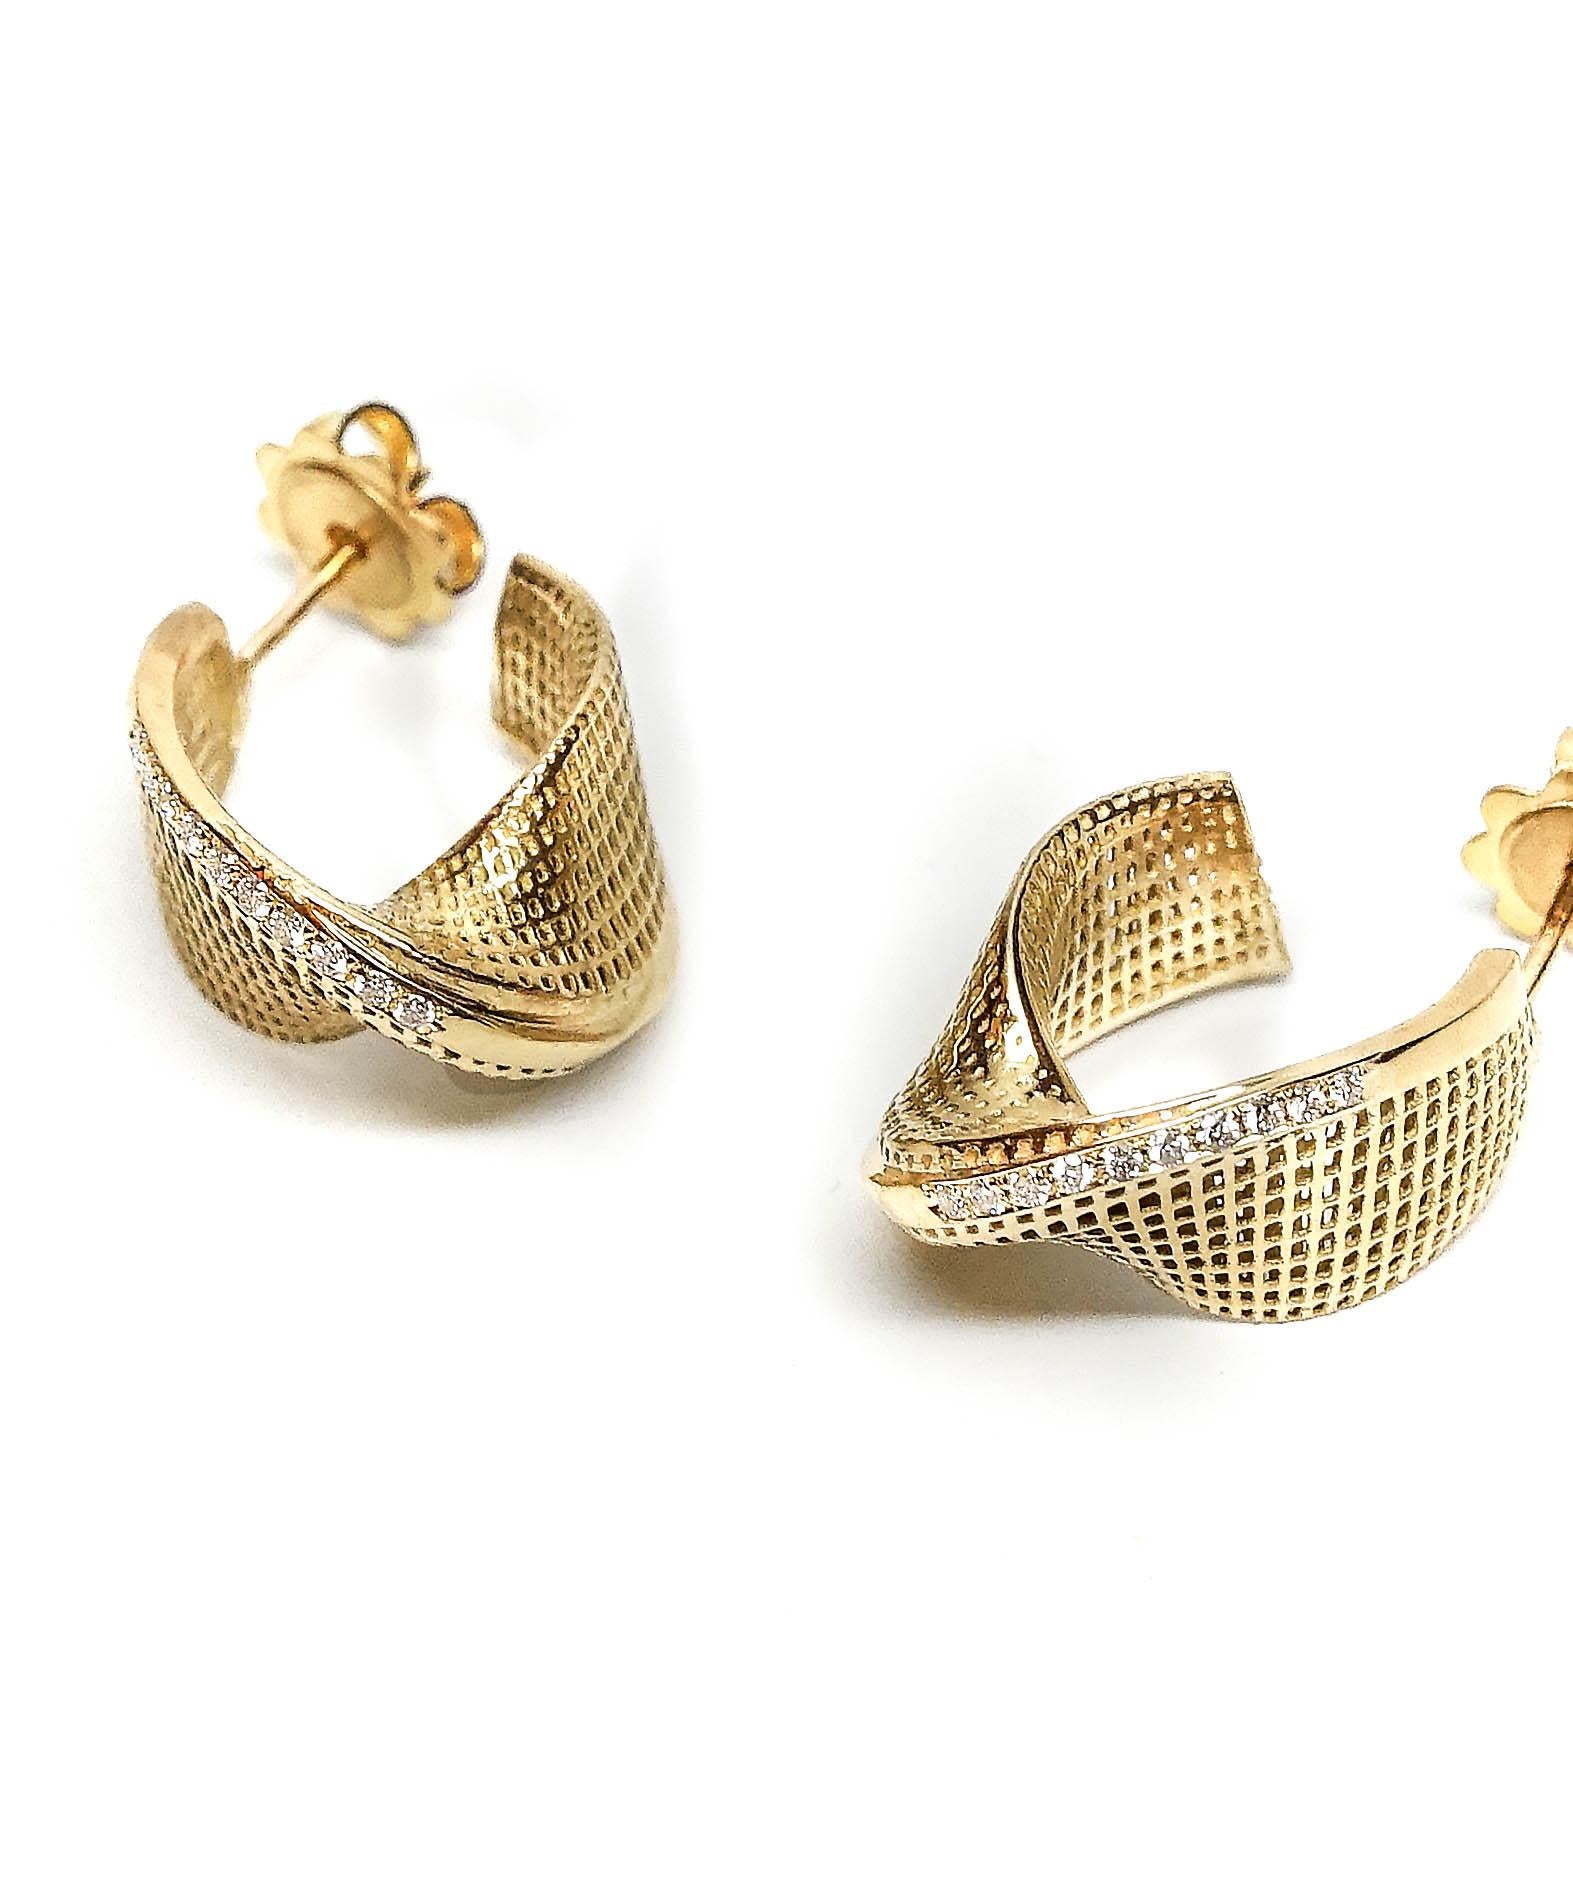 Small Mobius Earrings with a Diamonds - 18k gold

SALE

READY TO SHIP

Unique hoop earrings made with 3D printing technique in 18k gold. Design with net texture and square line on the edge. The manufacturing process results in a hollow object shaped